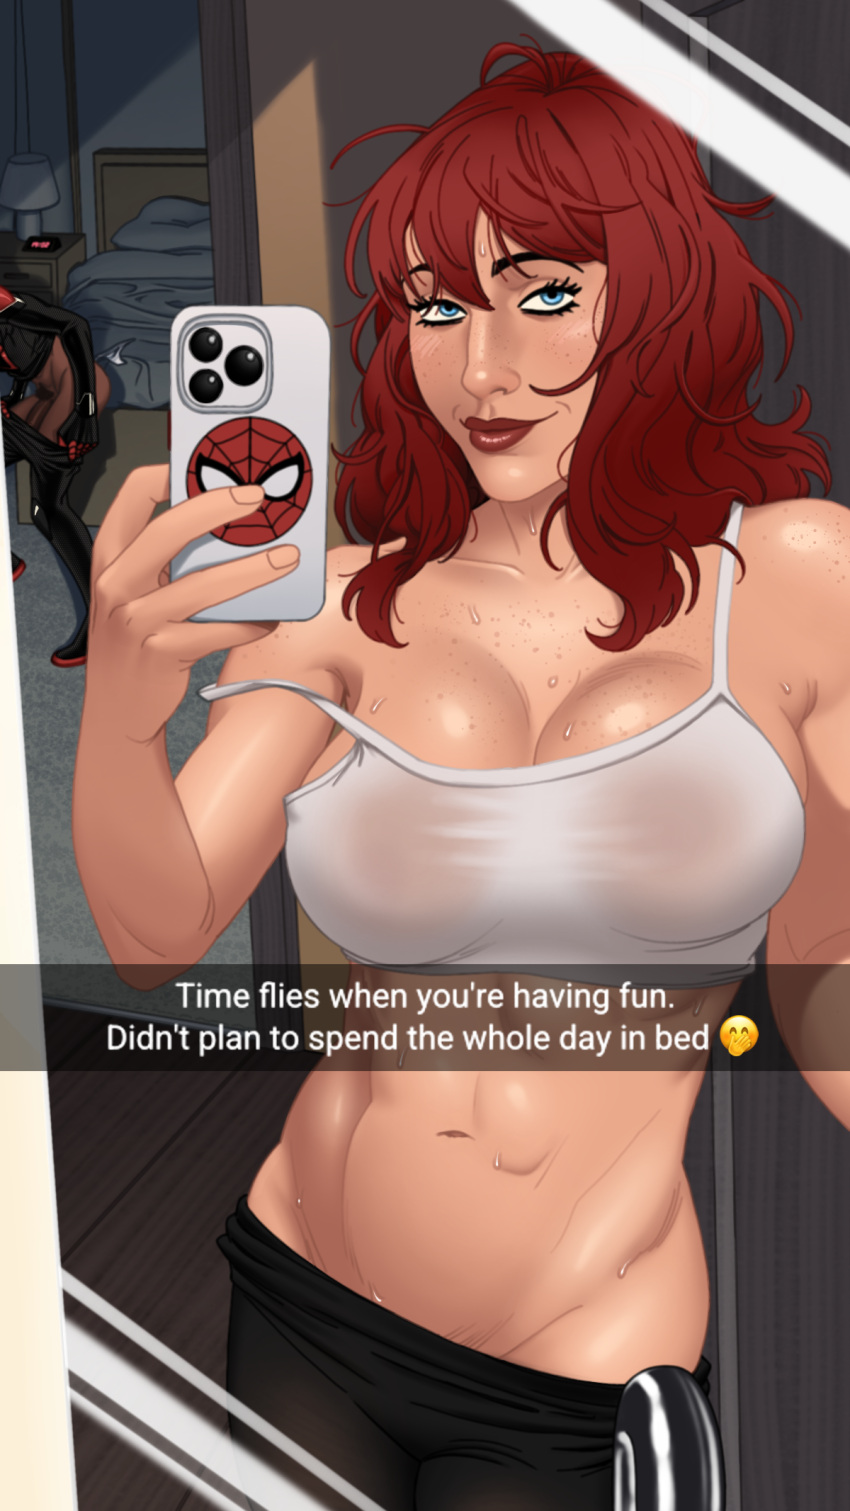 1boy 1girl abs after_sex age_difference bed bedroom big_breasts cheating cheating_wife crop_top digital_clock freckles freckles_on_breasts freckles_on_chest freckles_on_face freckles_on_shoulders interracial long_hair looking_at_viewer marvel marvel_comics mary_jane_watson messy_hair miles_morales milf mirror mirror_reflection older_female older_female_and_younger_boy putting_clothes_on red_hair redhead satisfied see-through selfpic smile snapchat spider-man spider-man_(series) sweat thin_clothing wet_clothes younger_male